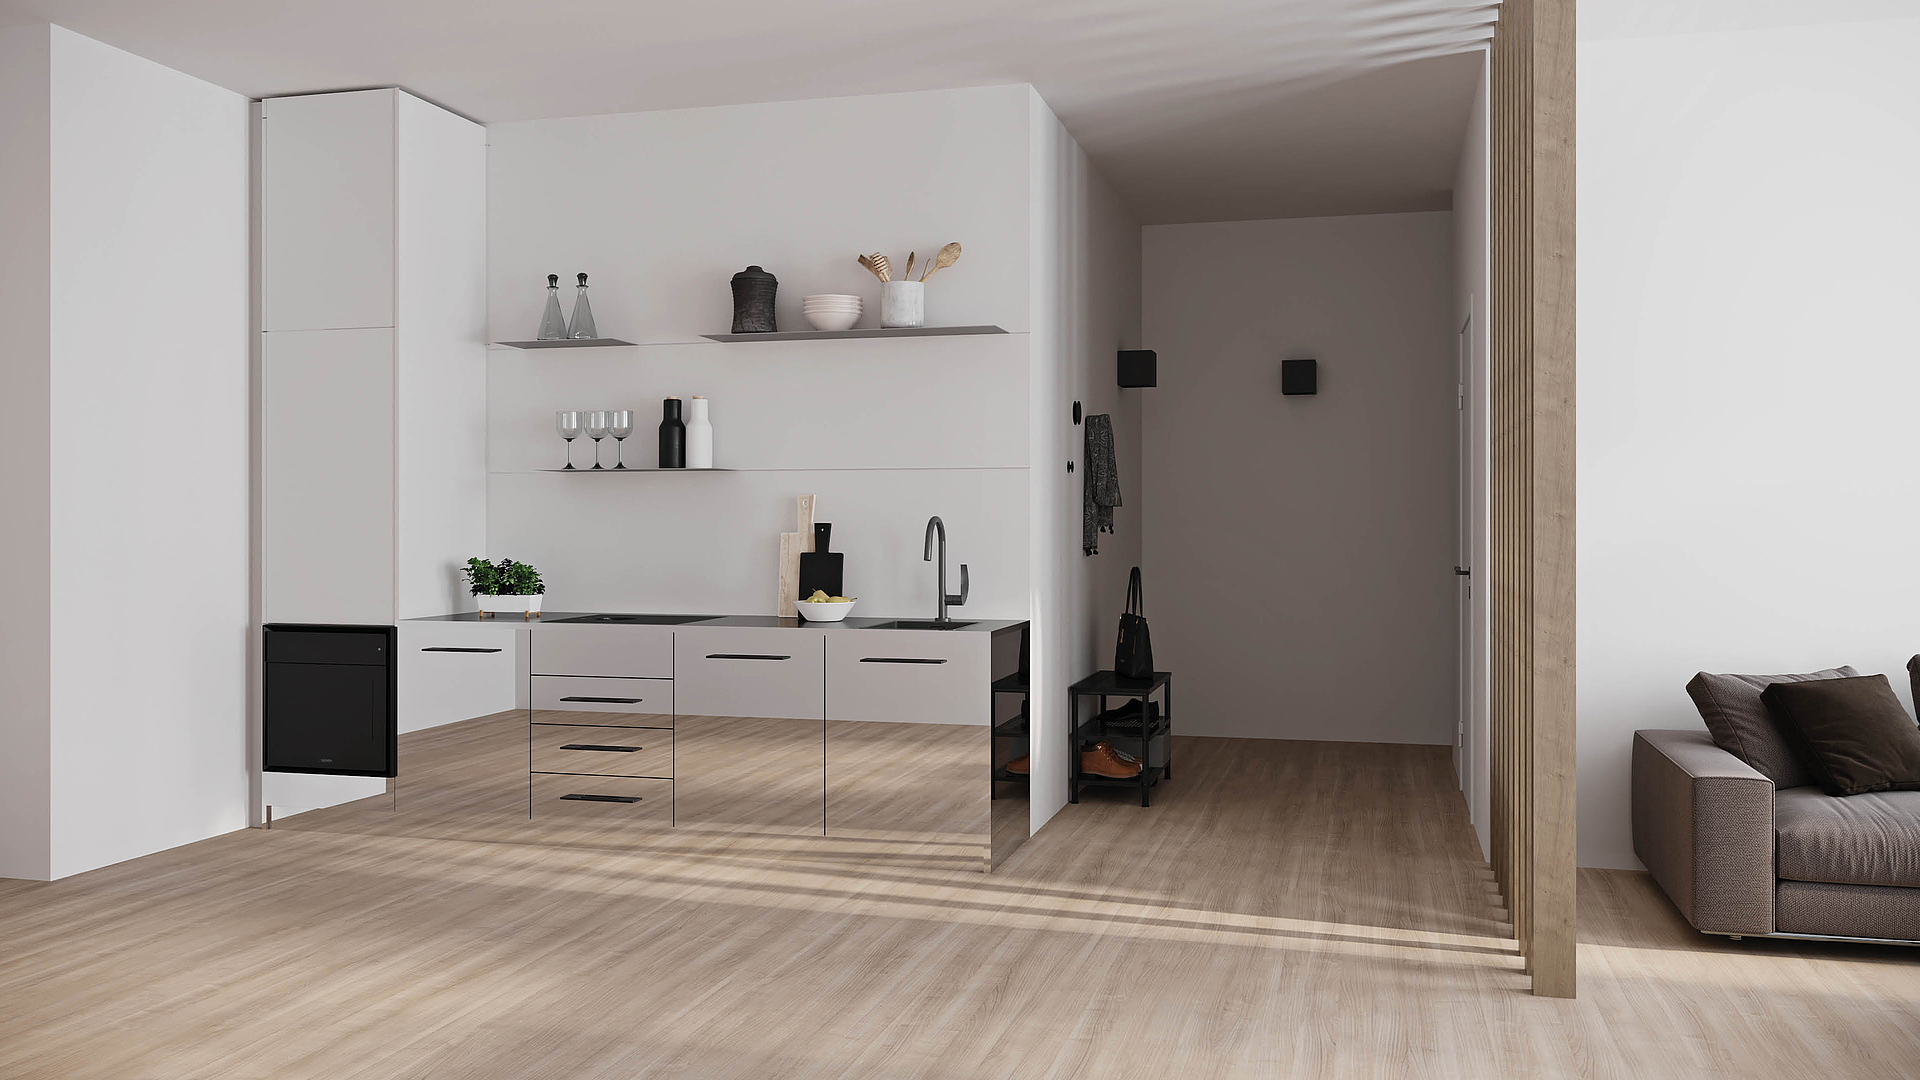 Minimalist kitchen with clean lines – perfect for singles